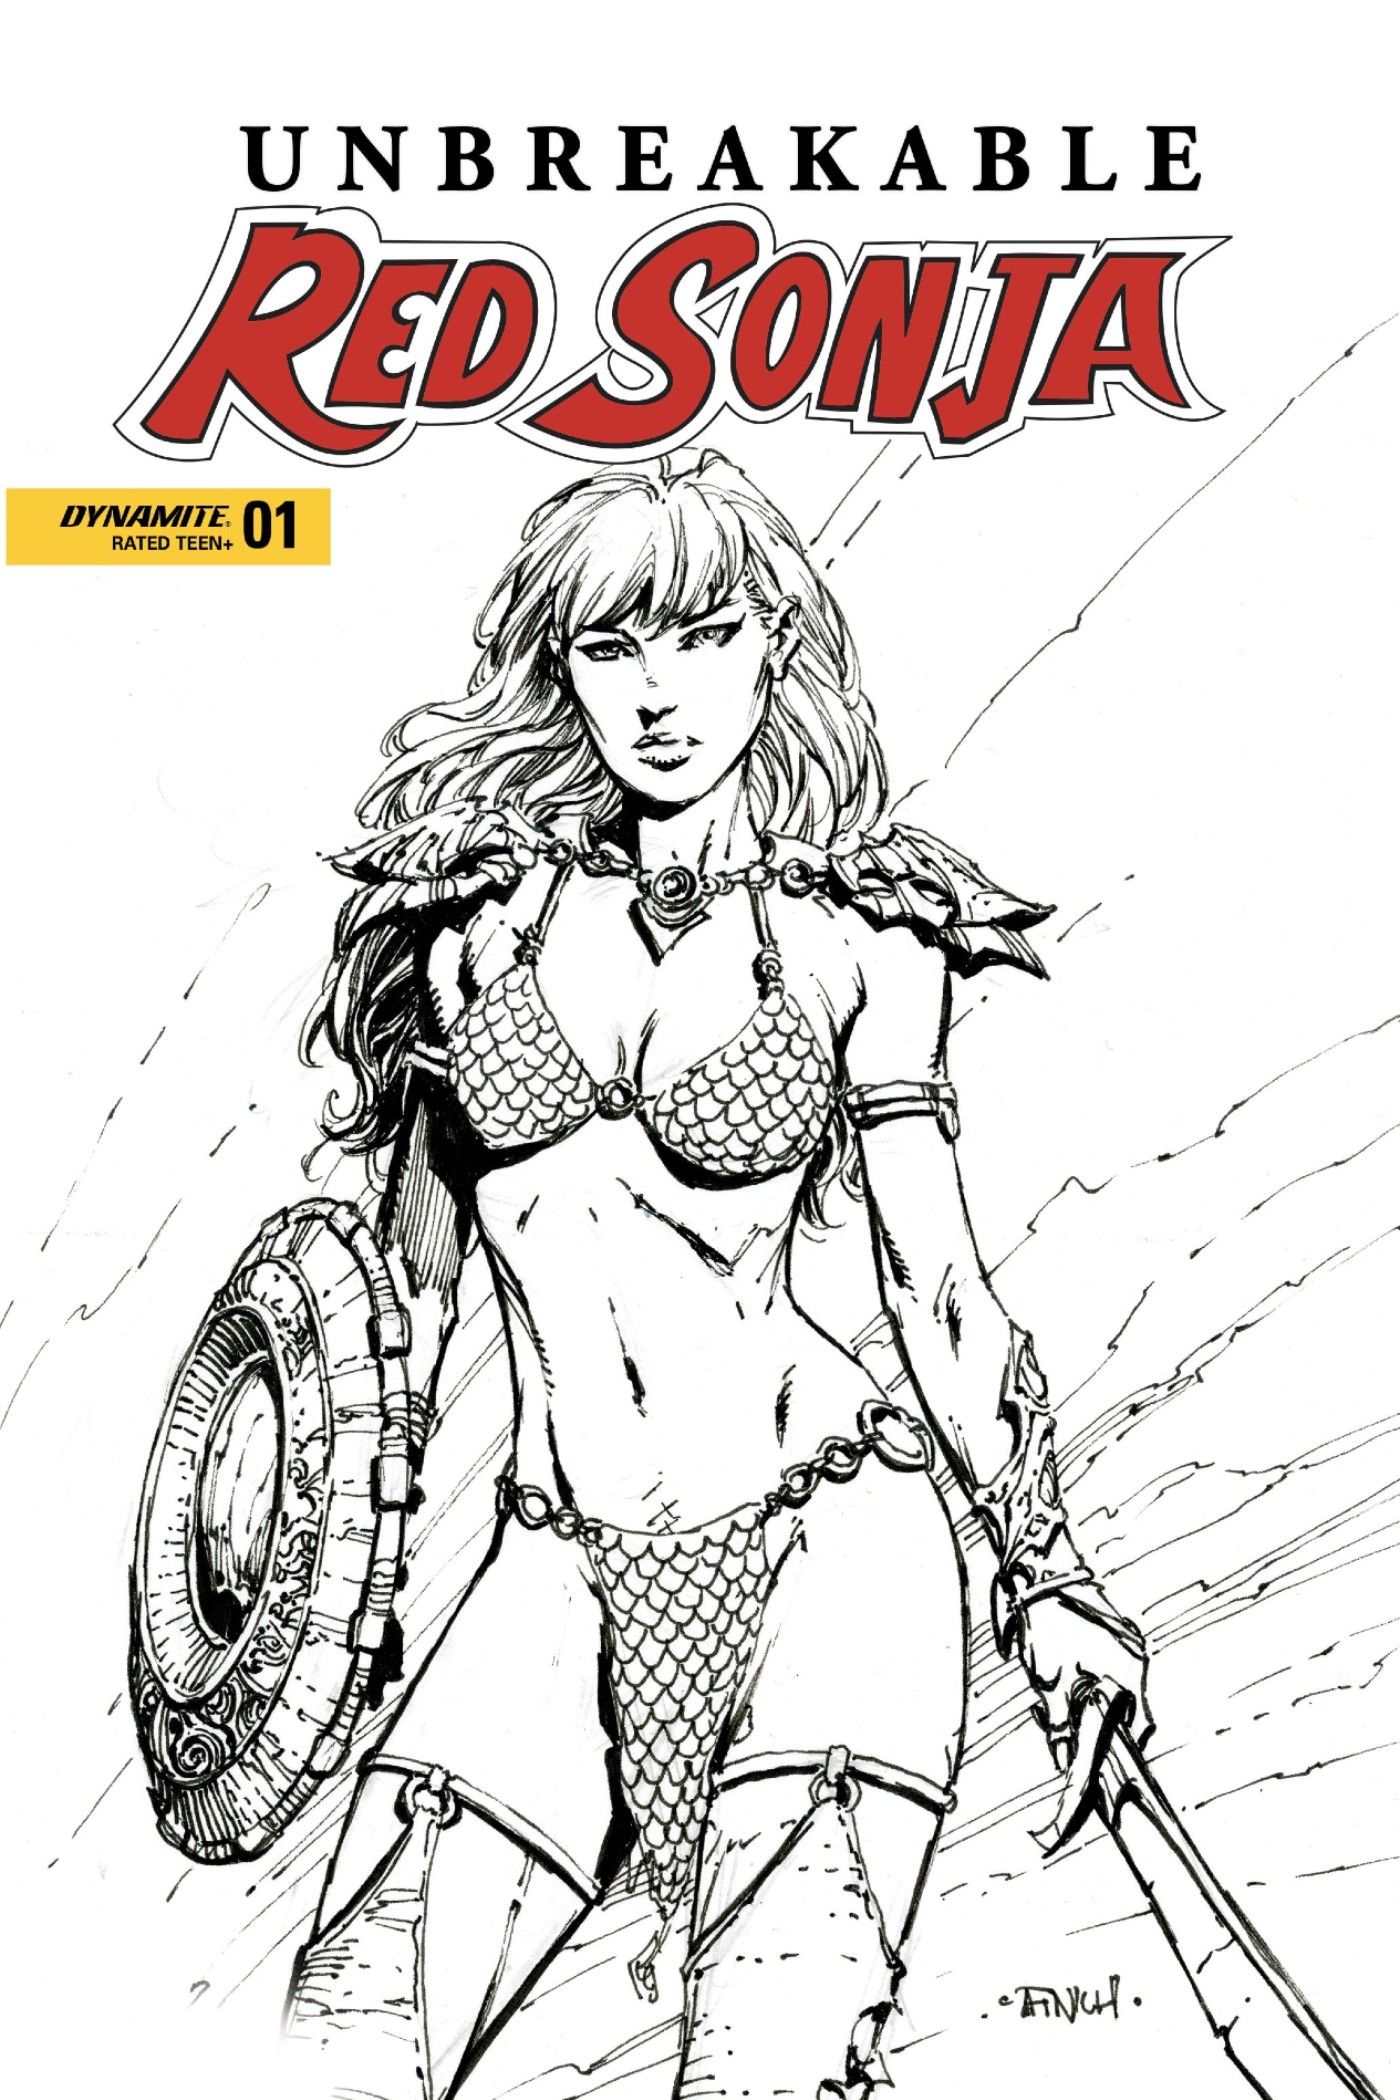 Unbreakable Red Sonja by Dynamite Comics